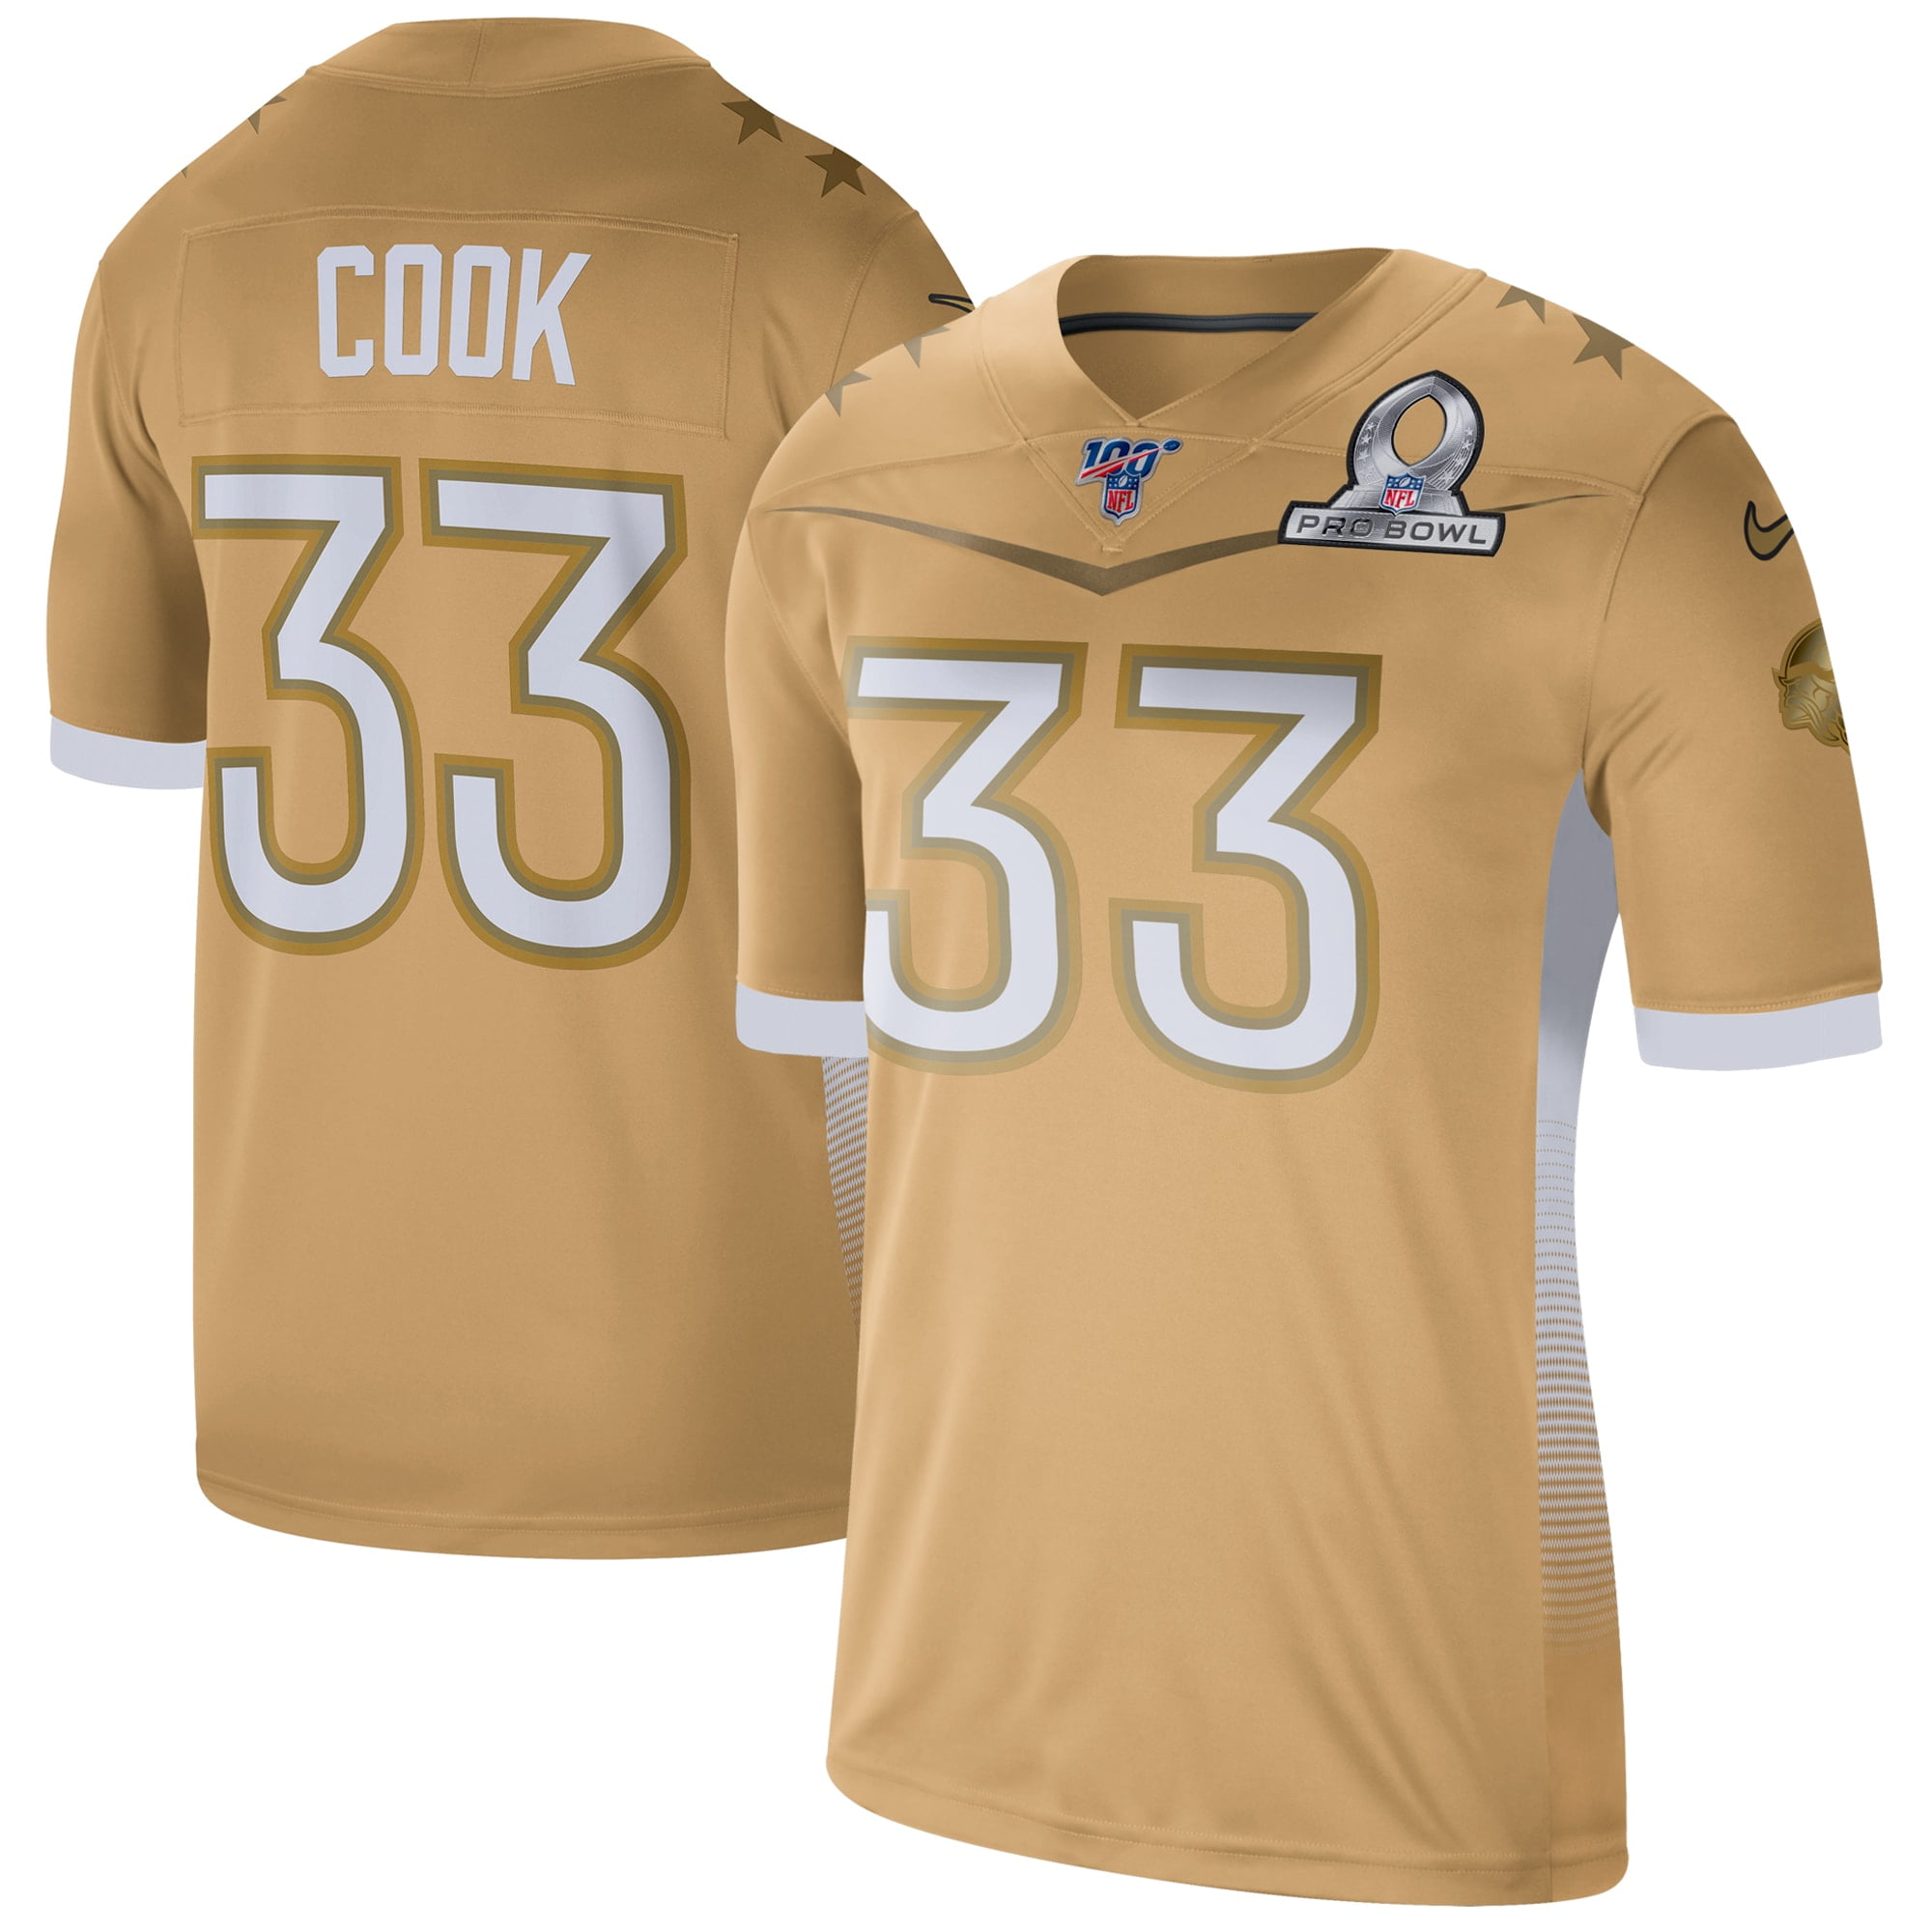 dalvin cook pro bowl jersey